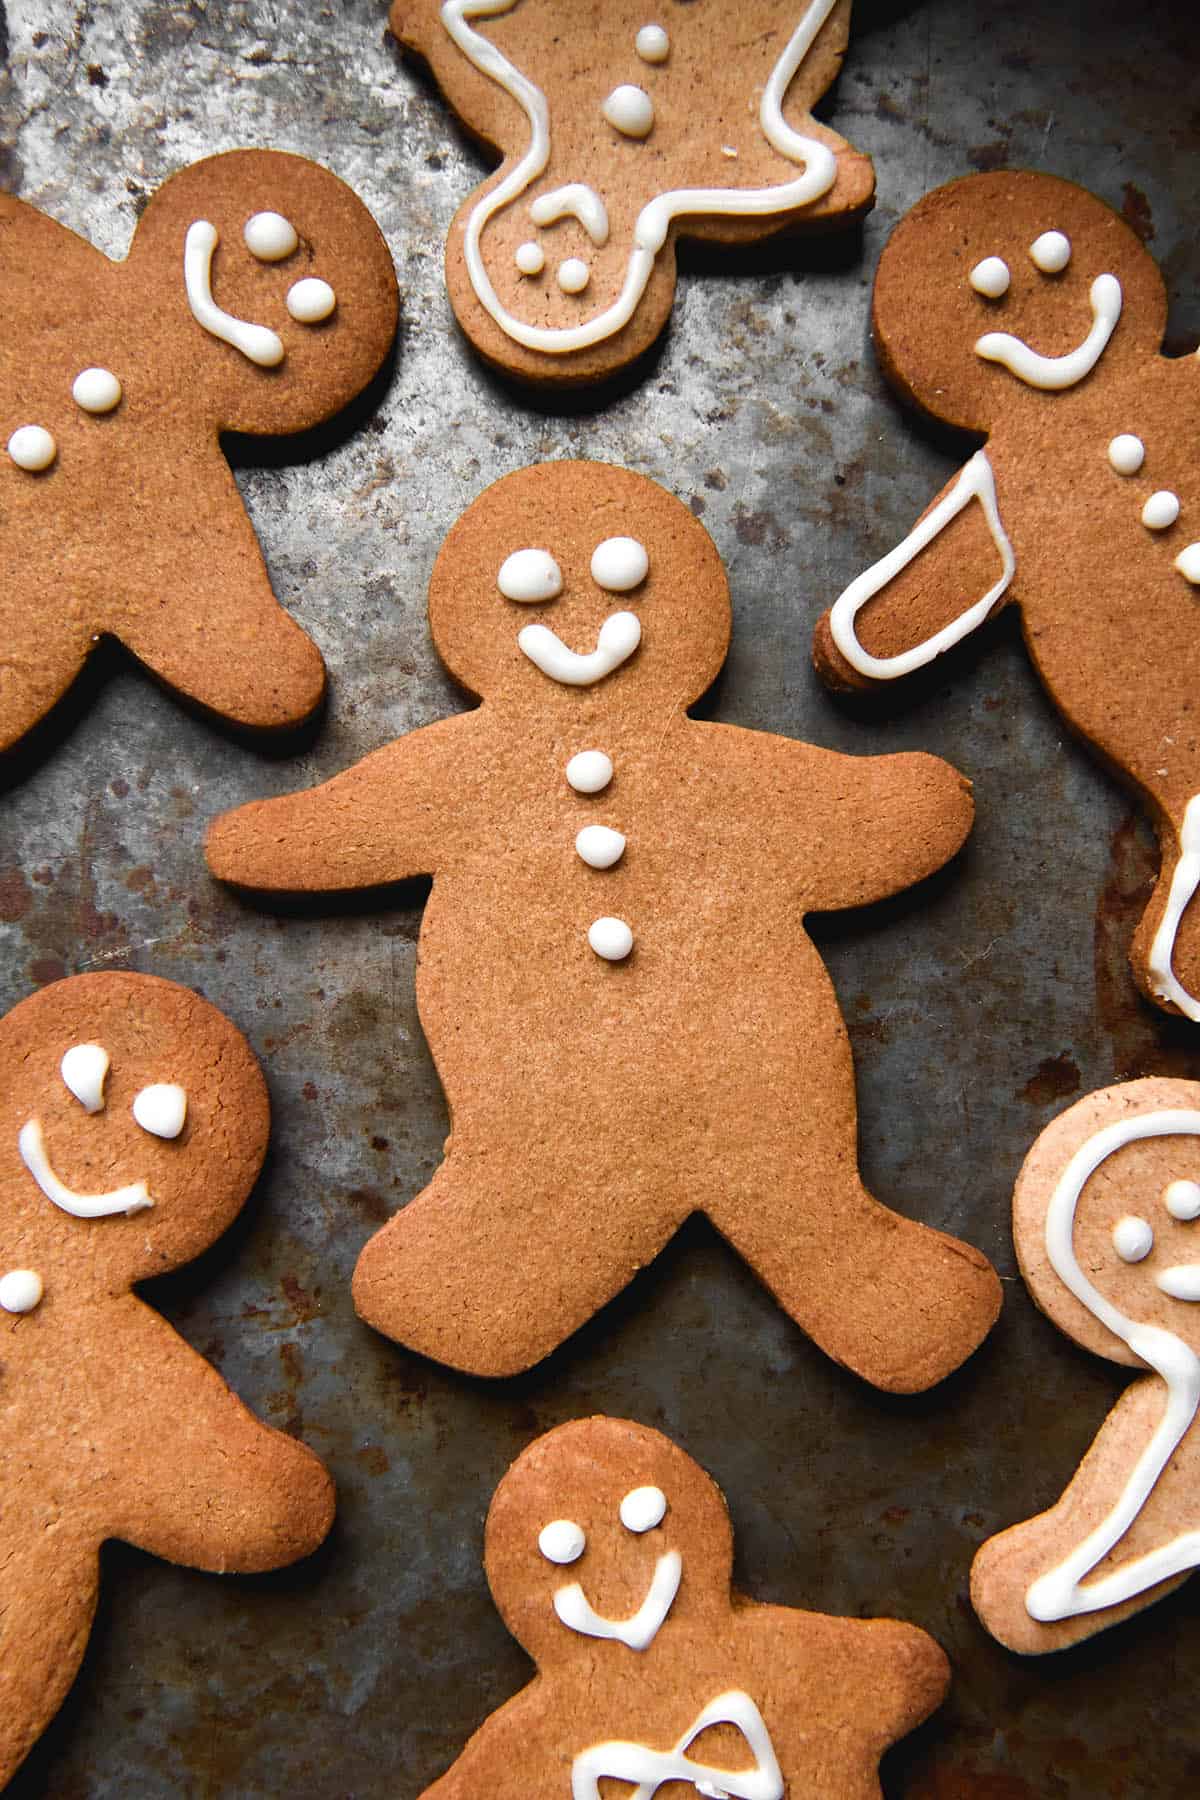 An aerial view of gluten free gingerbread people on a dark steel backdrop. The gingerbread are lightly decorated with white icing, giving them smiley faces and other light details. 